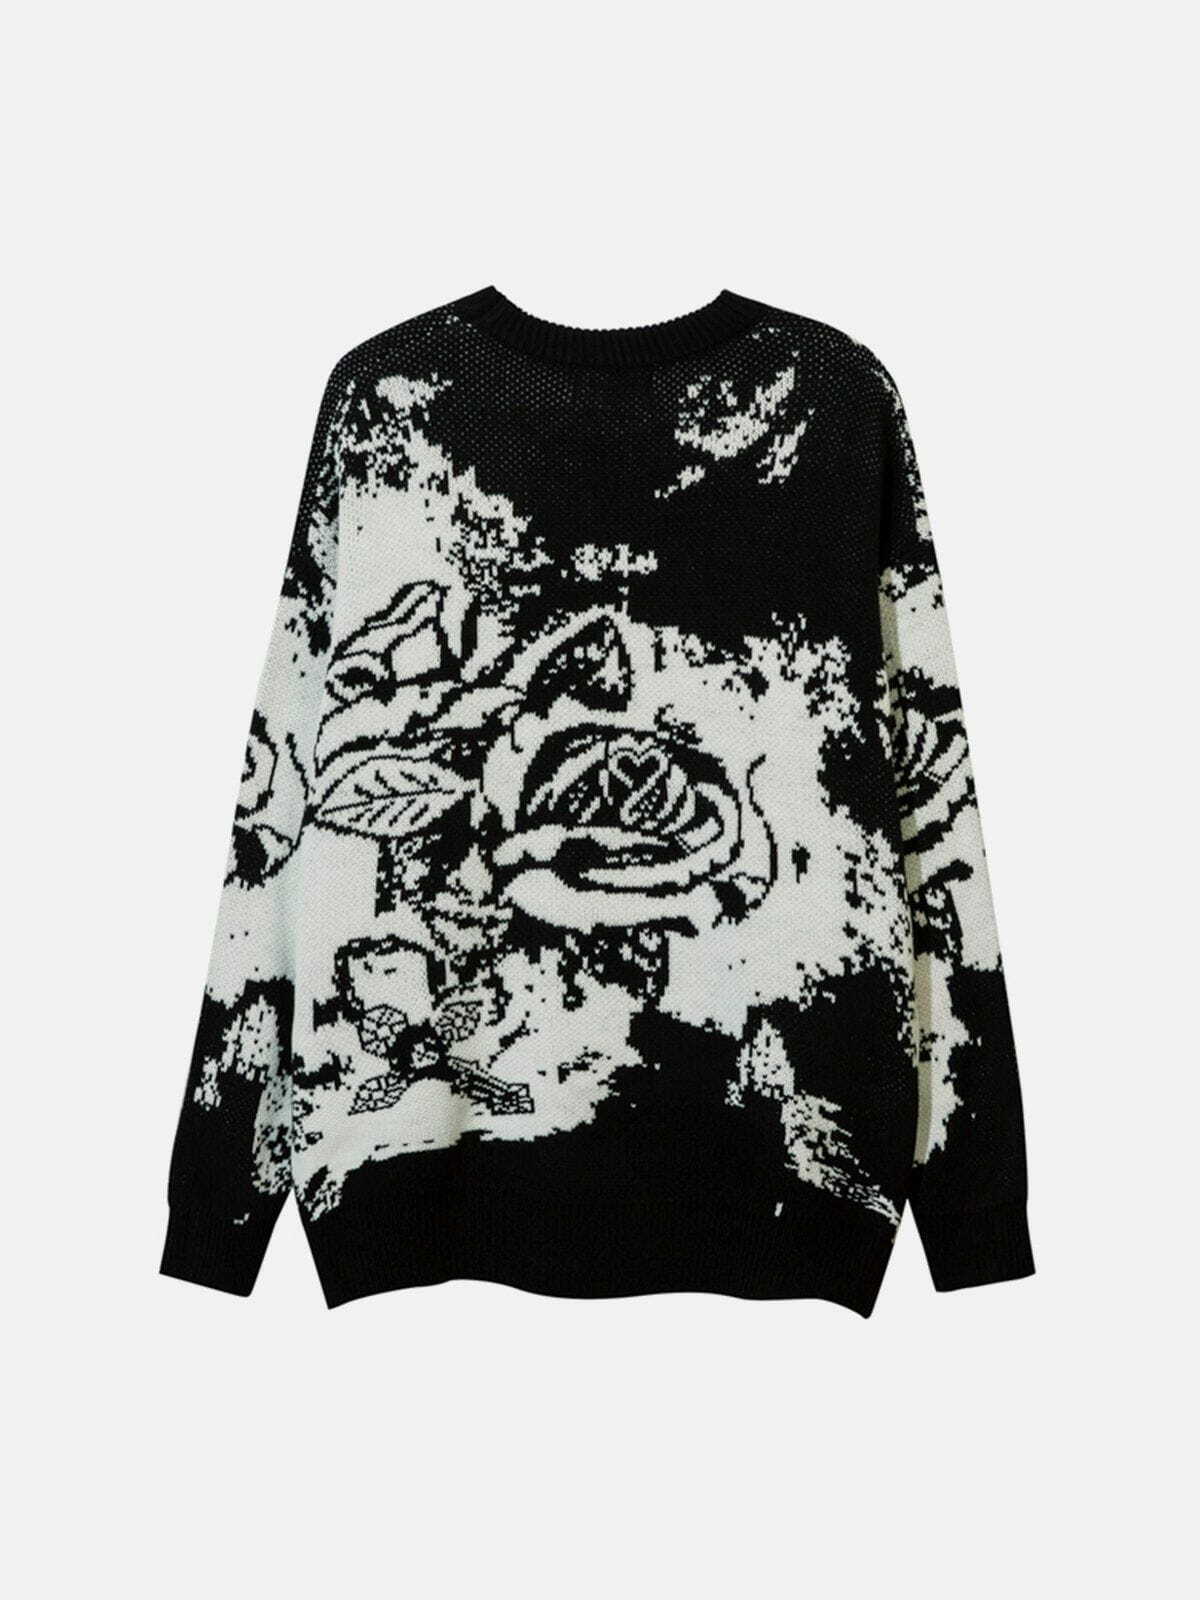 knitted rose pattern sweater youthful & quirky streetwear 1638